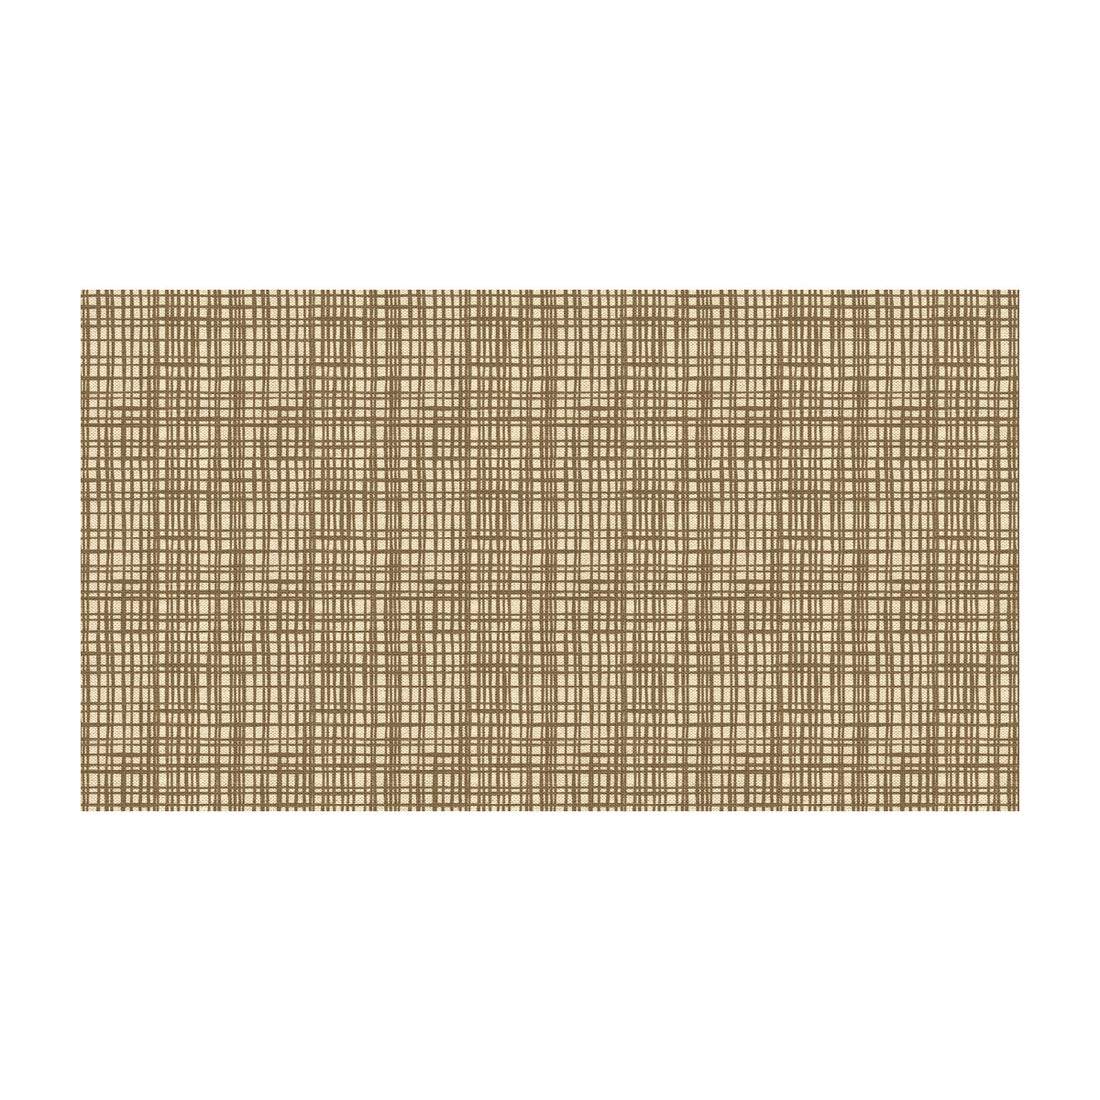 Openweave fabric in hazel color - pattern GWF-3409.6.0 - by Lee Jofa Modern in the Ashley Hicks Textures collection